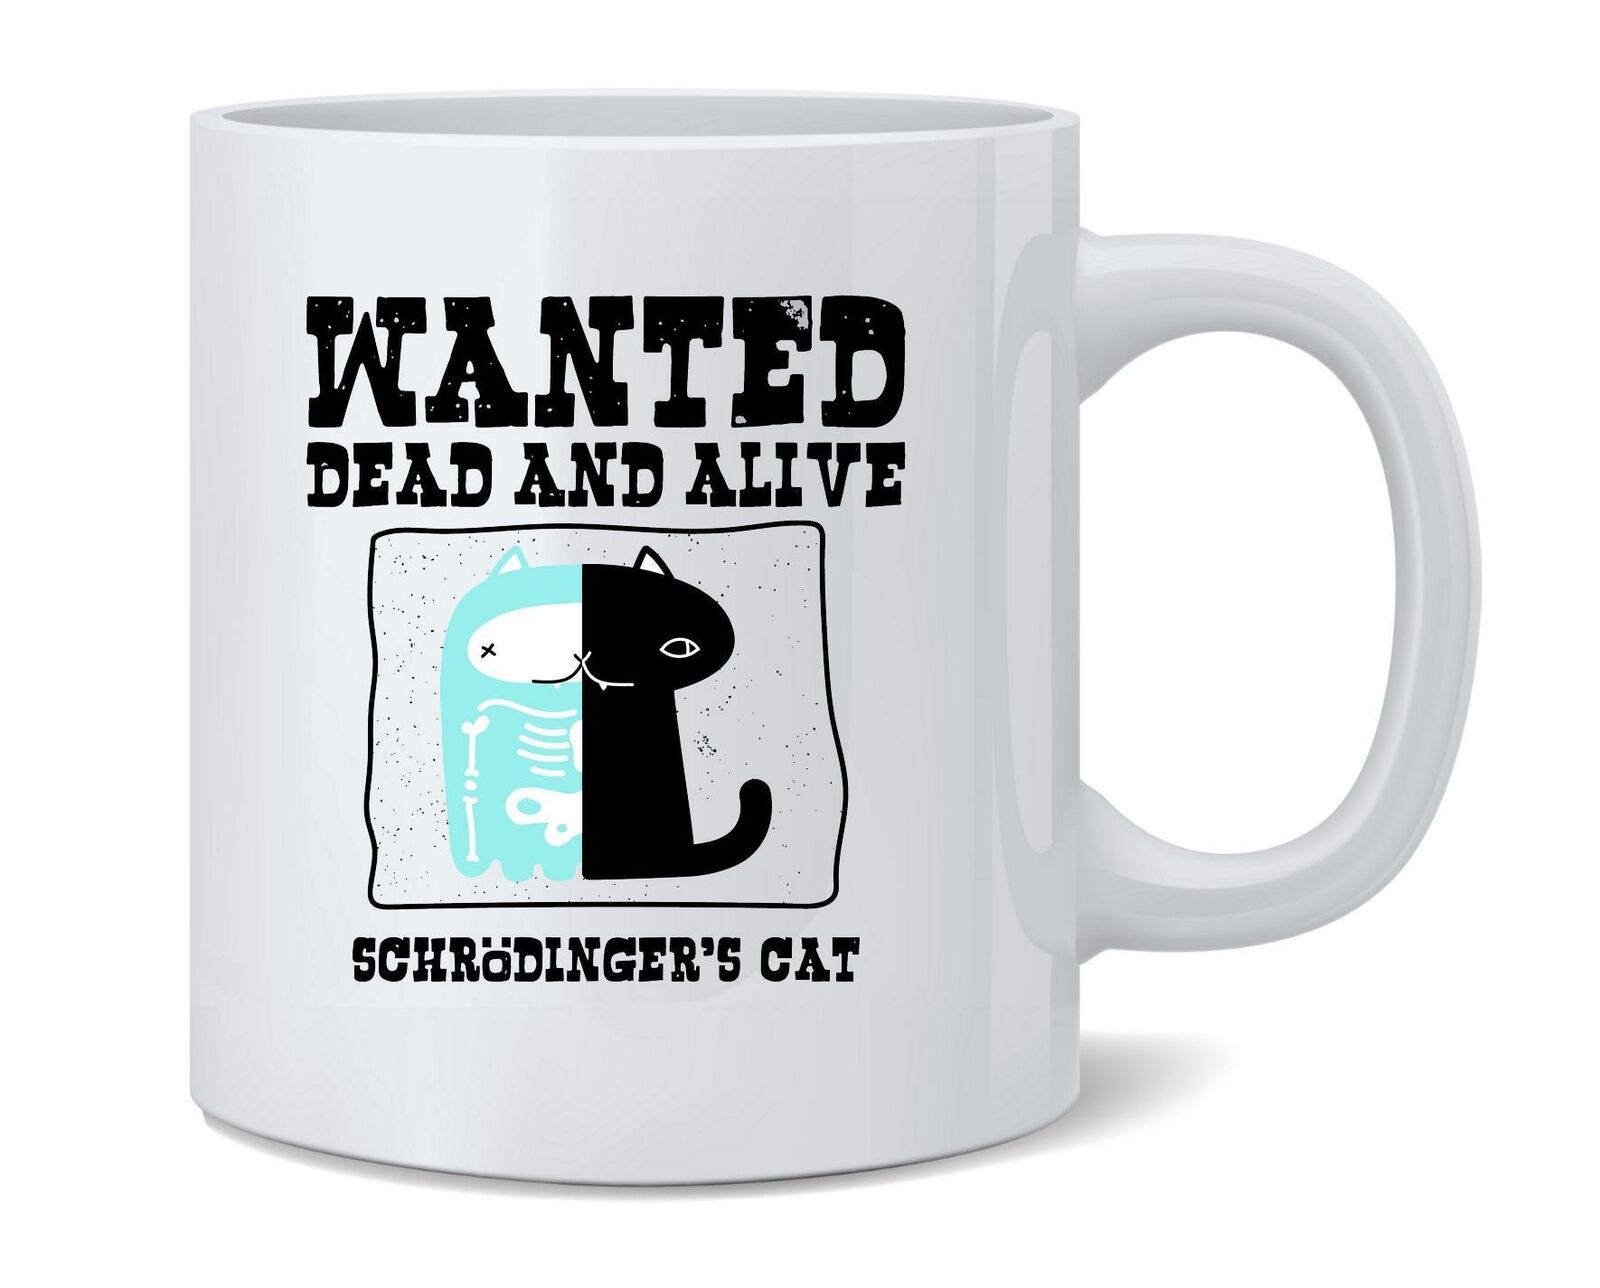 Schrodingers Cat Wanted Dead and Alive Funny Ceramic Coffee Mug Tea Cup 12 oz